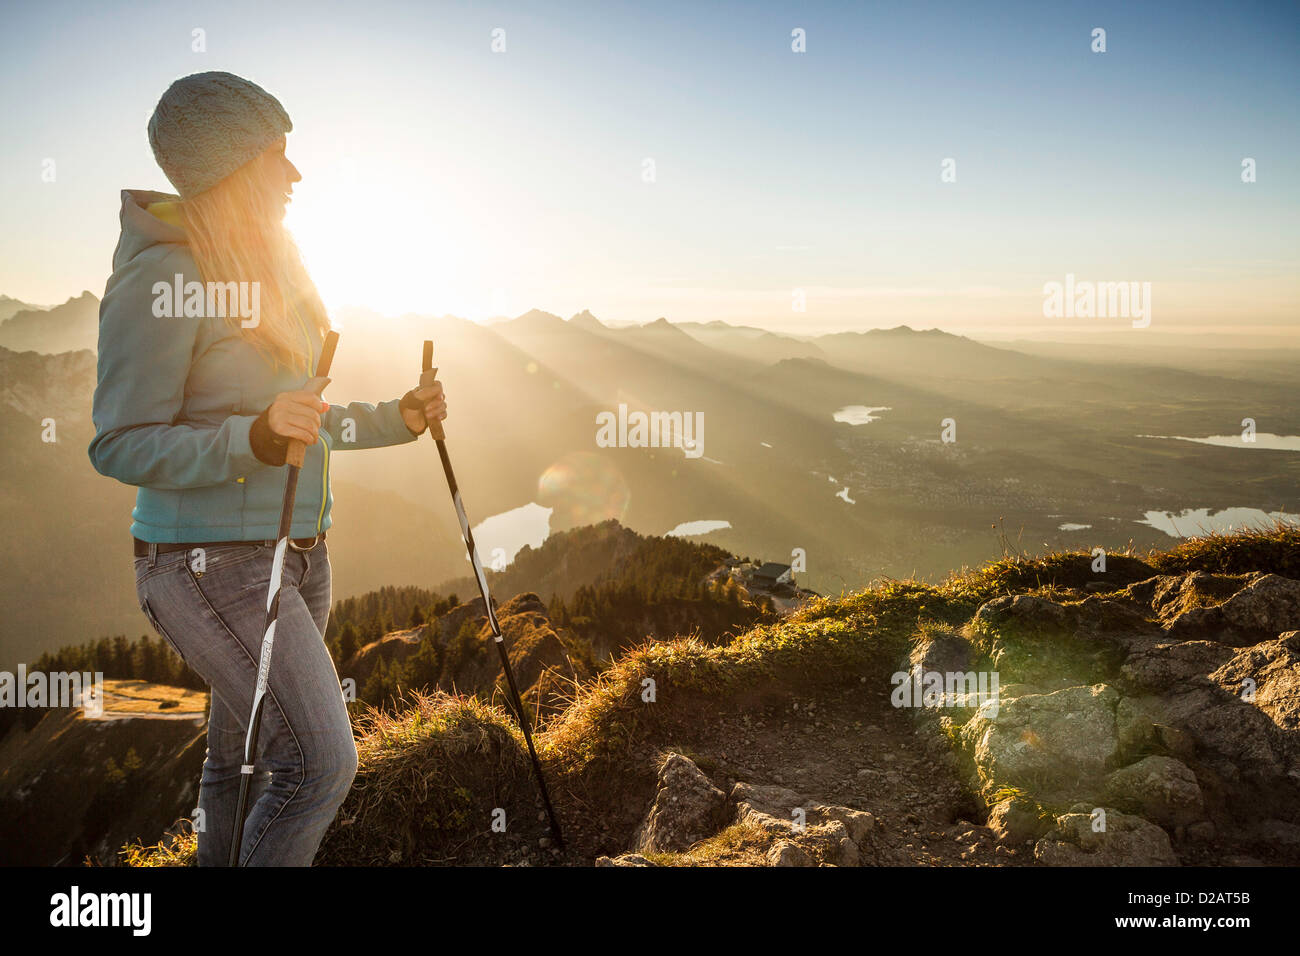 Hiker standing on rocky hilltop Stock Photo